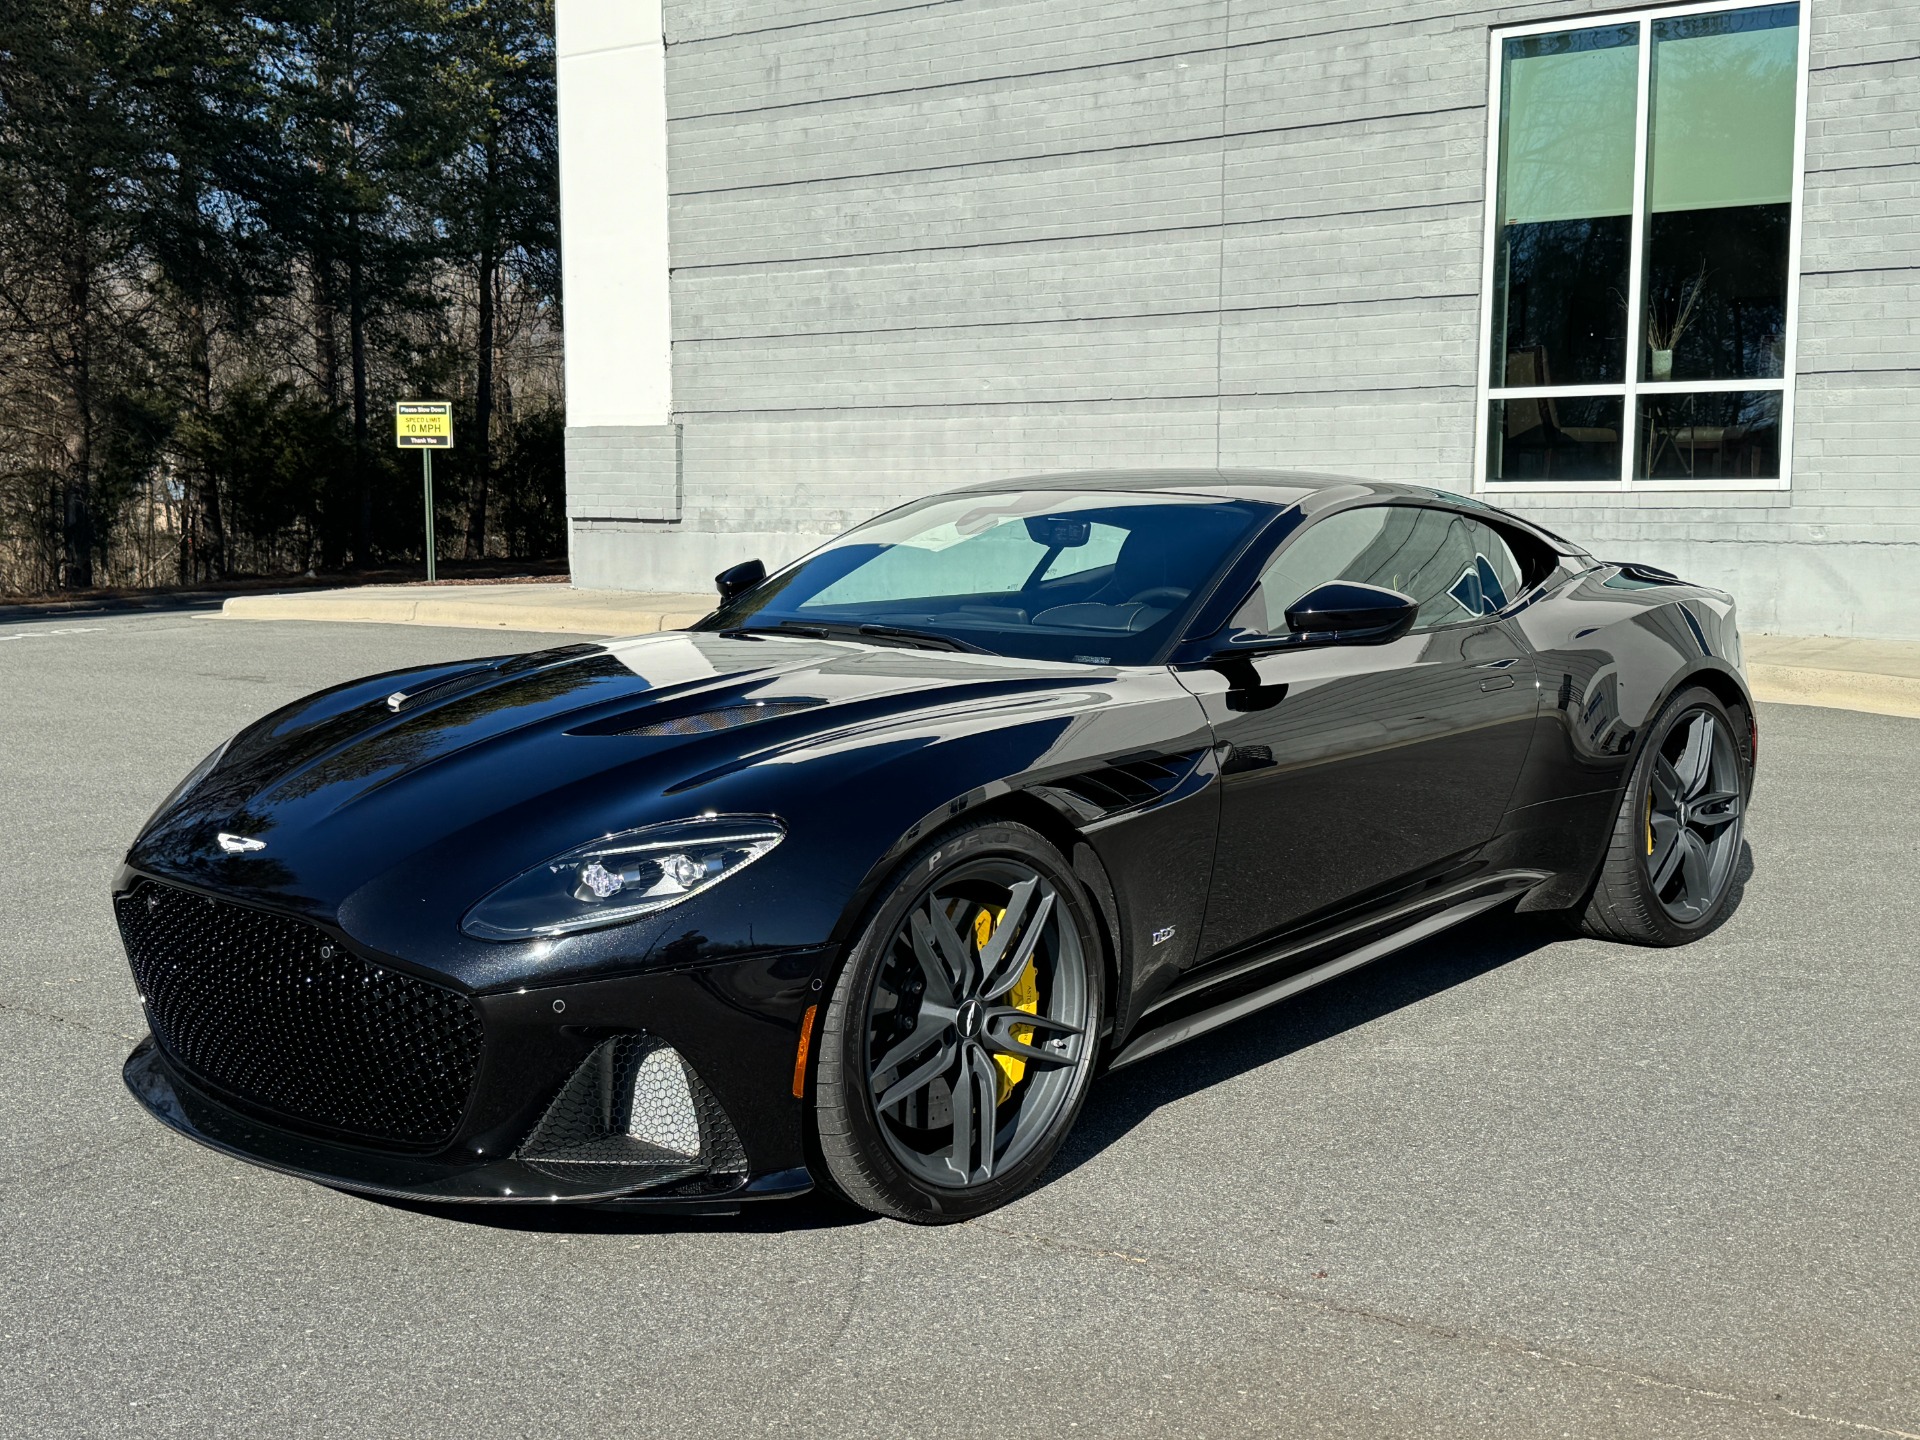 Used 2020 Aston Martin DBS SUPERLEGGERA / CARBON FIBER / V12 750HP / ACCENT STITCHING for sale $240,000 at Formula Imports in Charlotte NC 28227 3